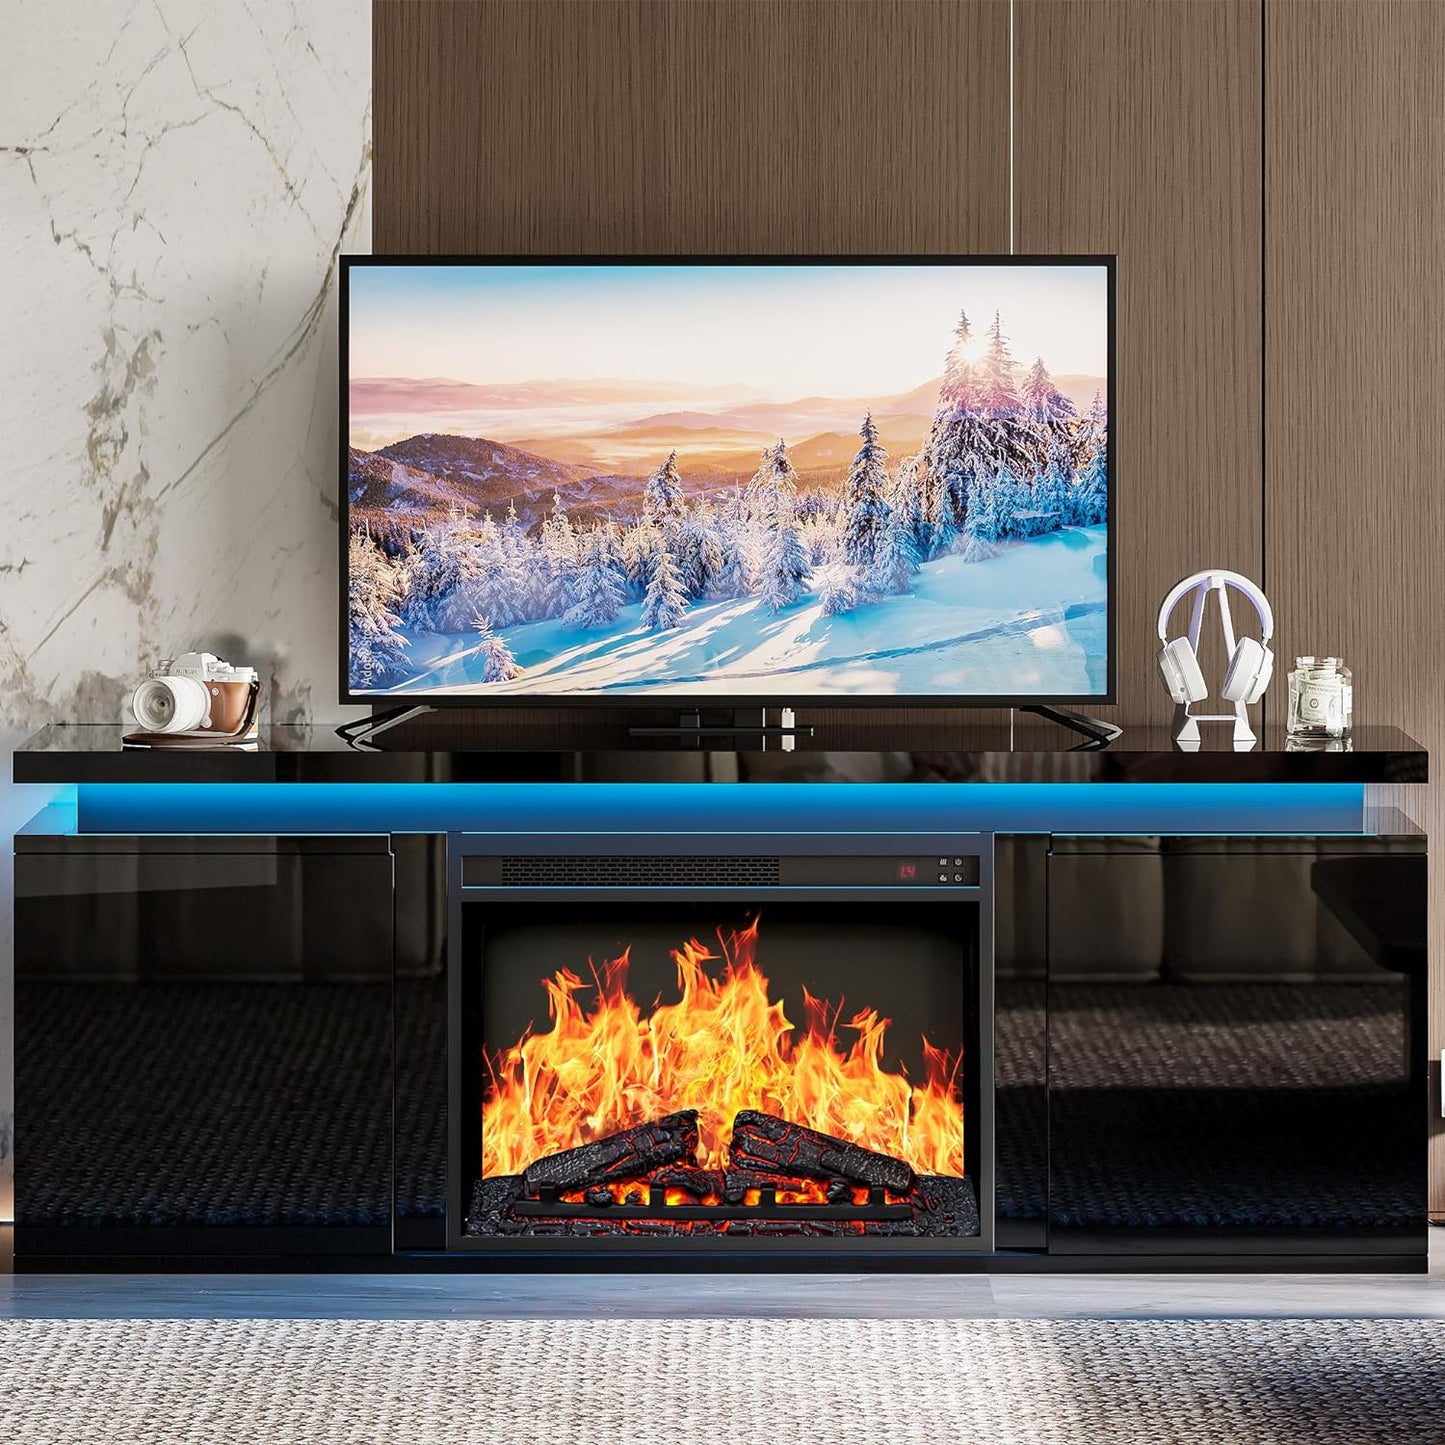 IRONCK Black Fireplace TV Stand with Electric Fireplace